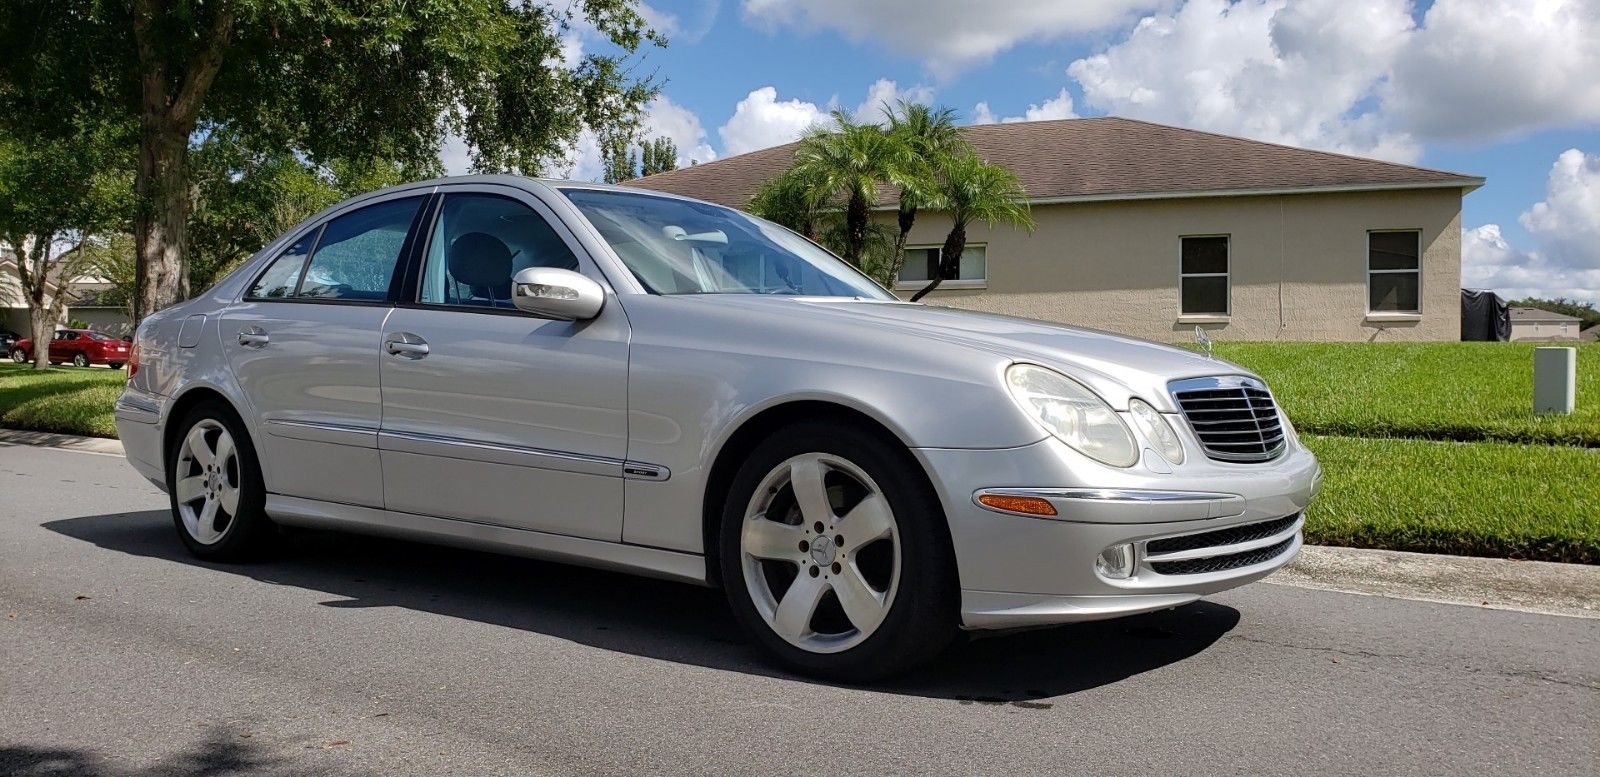 2003 Mercedes Benz E Class E500 2003 Mercedes Benz E500 Fully Loaded V8 Priced To Sell 2018 2019 Is In Stock And For Sale 24carshop Com